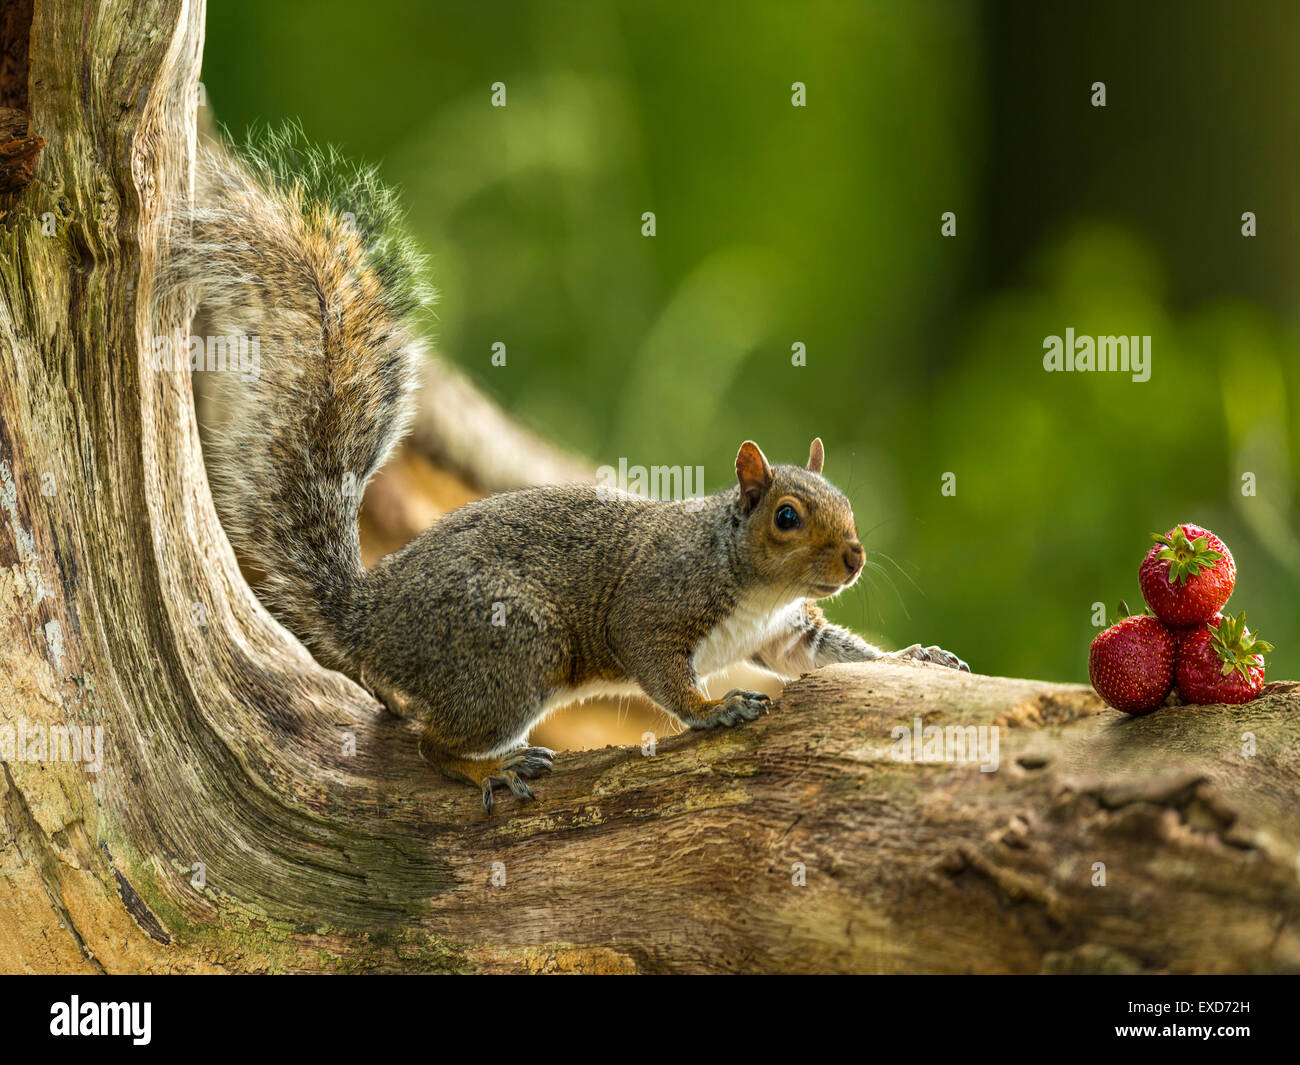 Wild Fruit, 'Don't Squirrel these away! ', great promo shot for ad campaign, retail, grocery, etc. Stock Photo